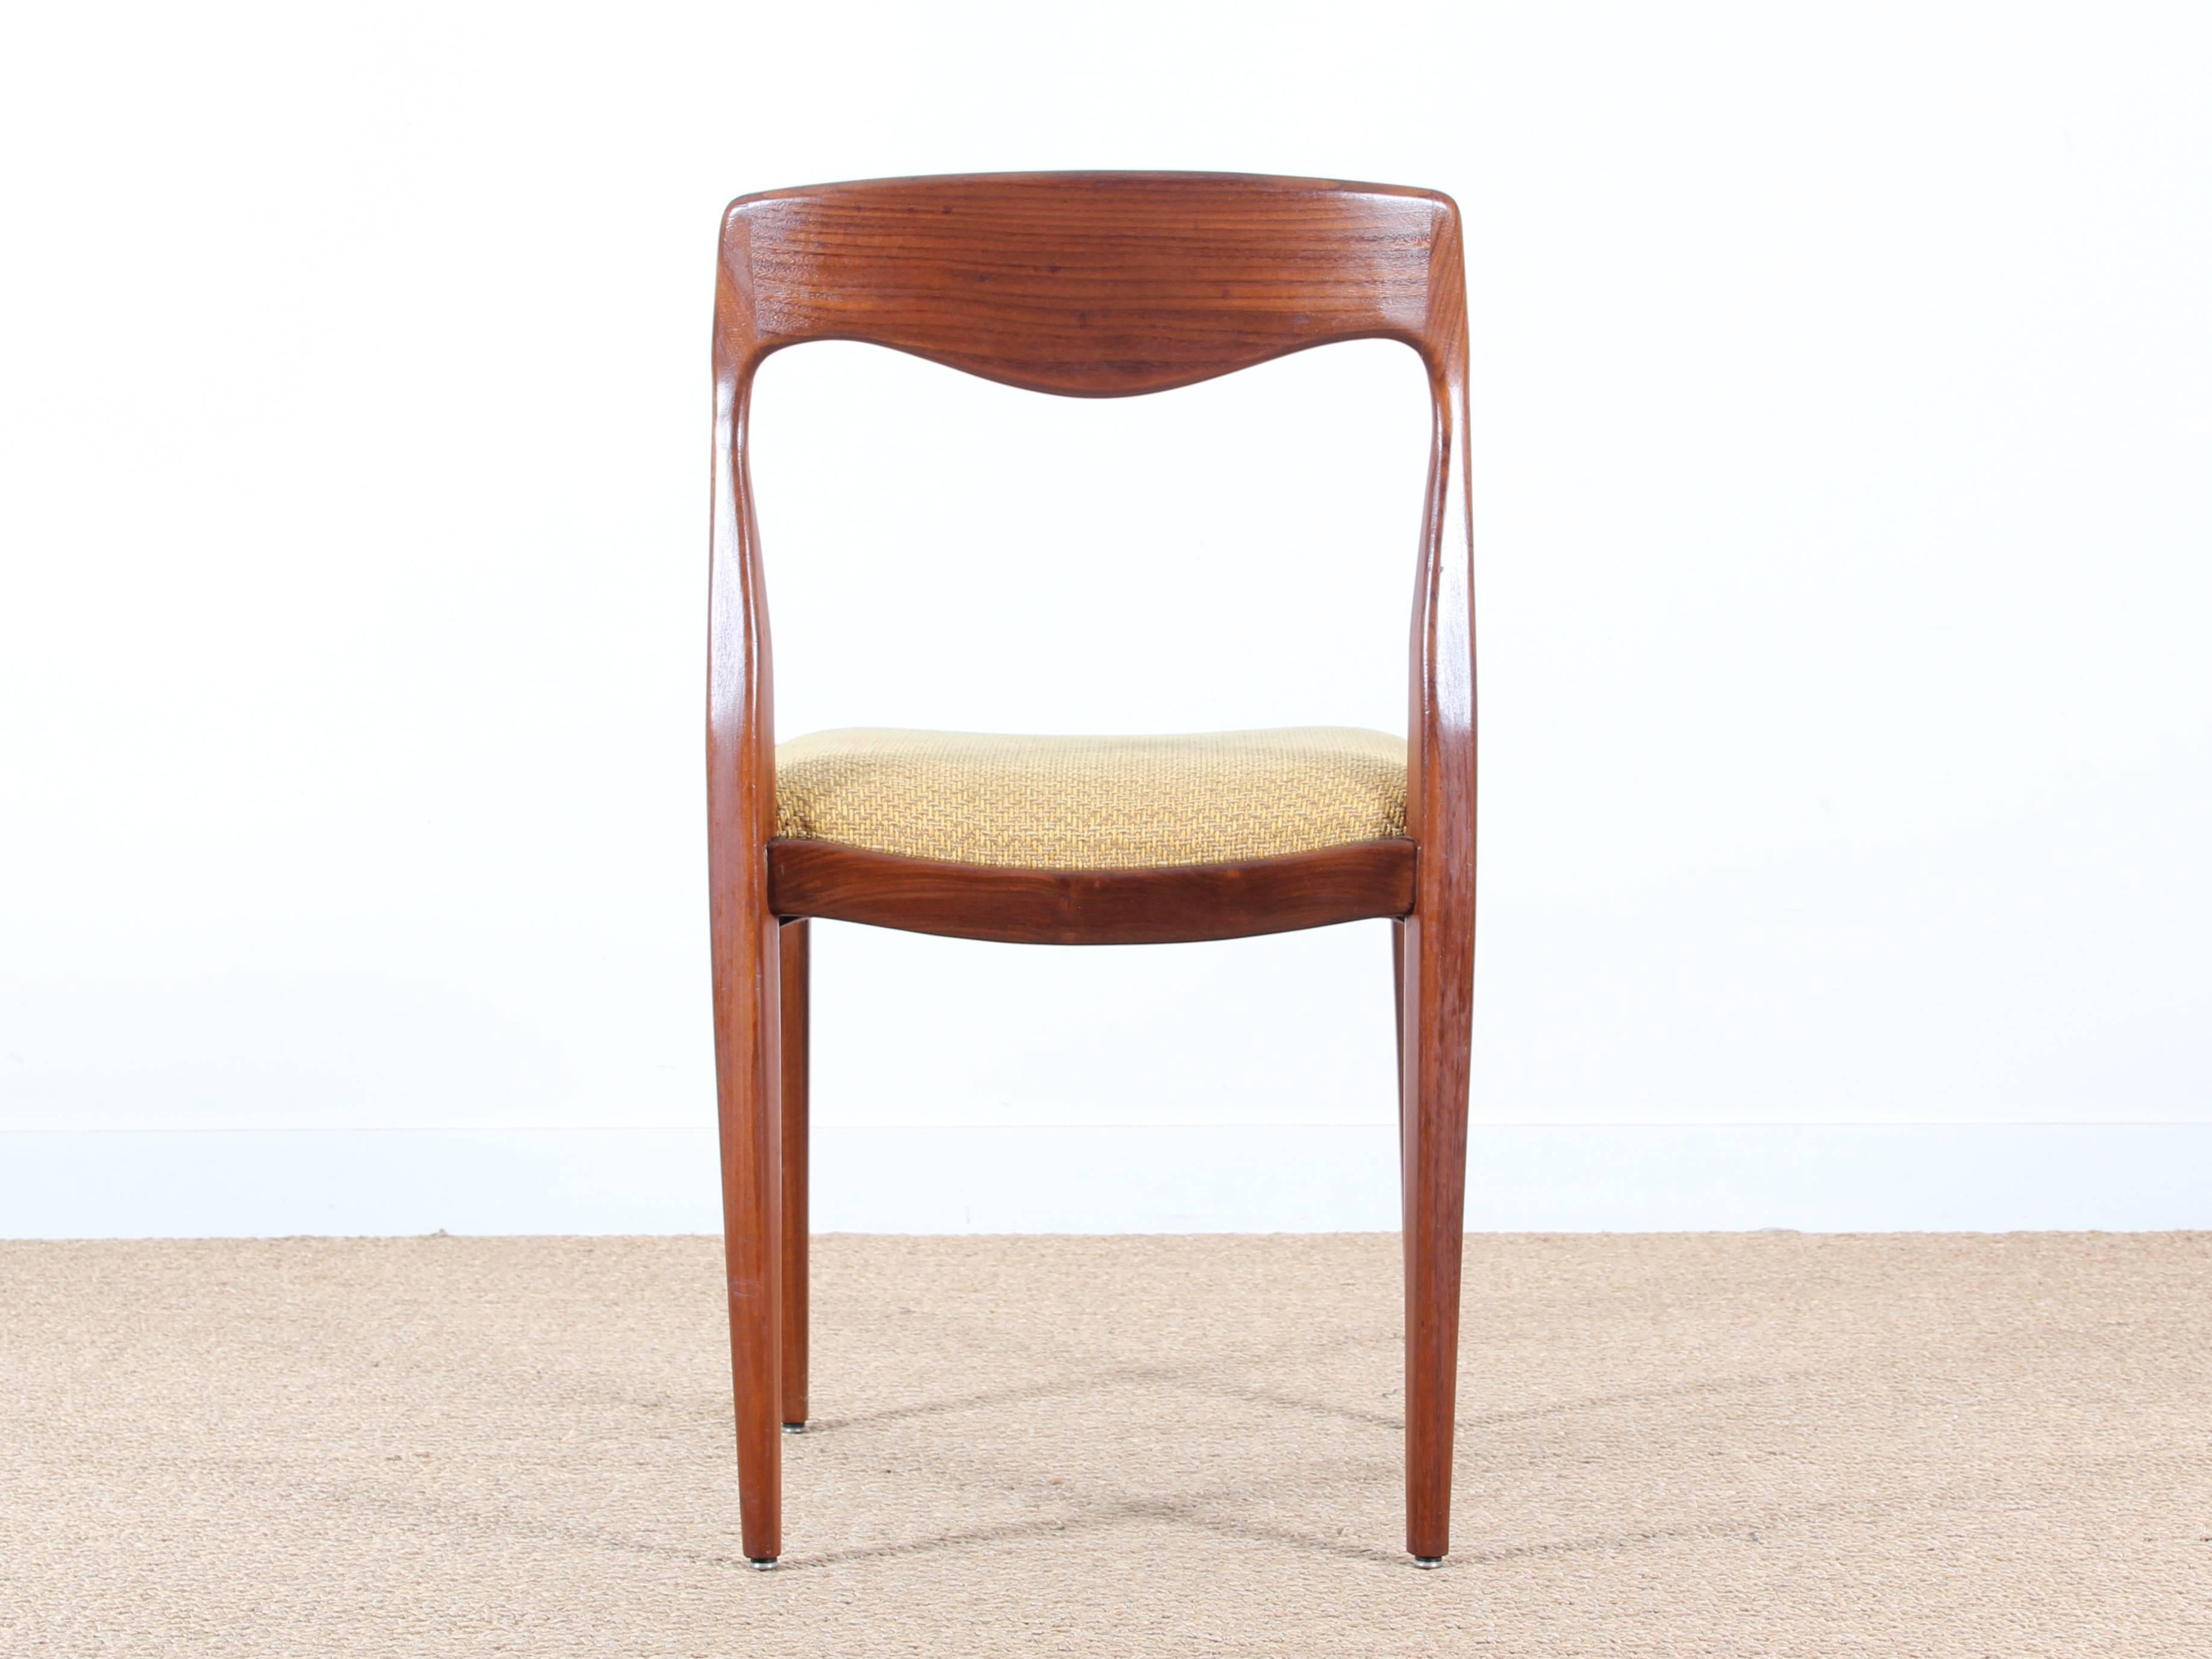 Mid-20th Century Set of Four Scandinavian Chairs in Teak with Pierre Frey Fabric